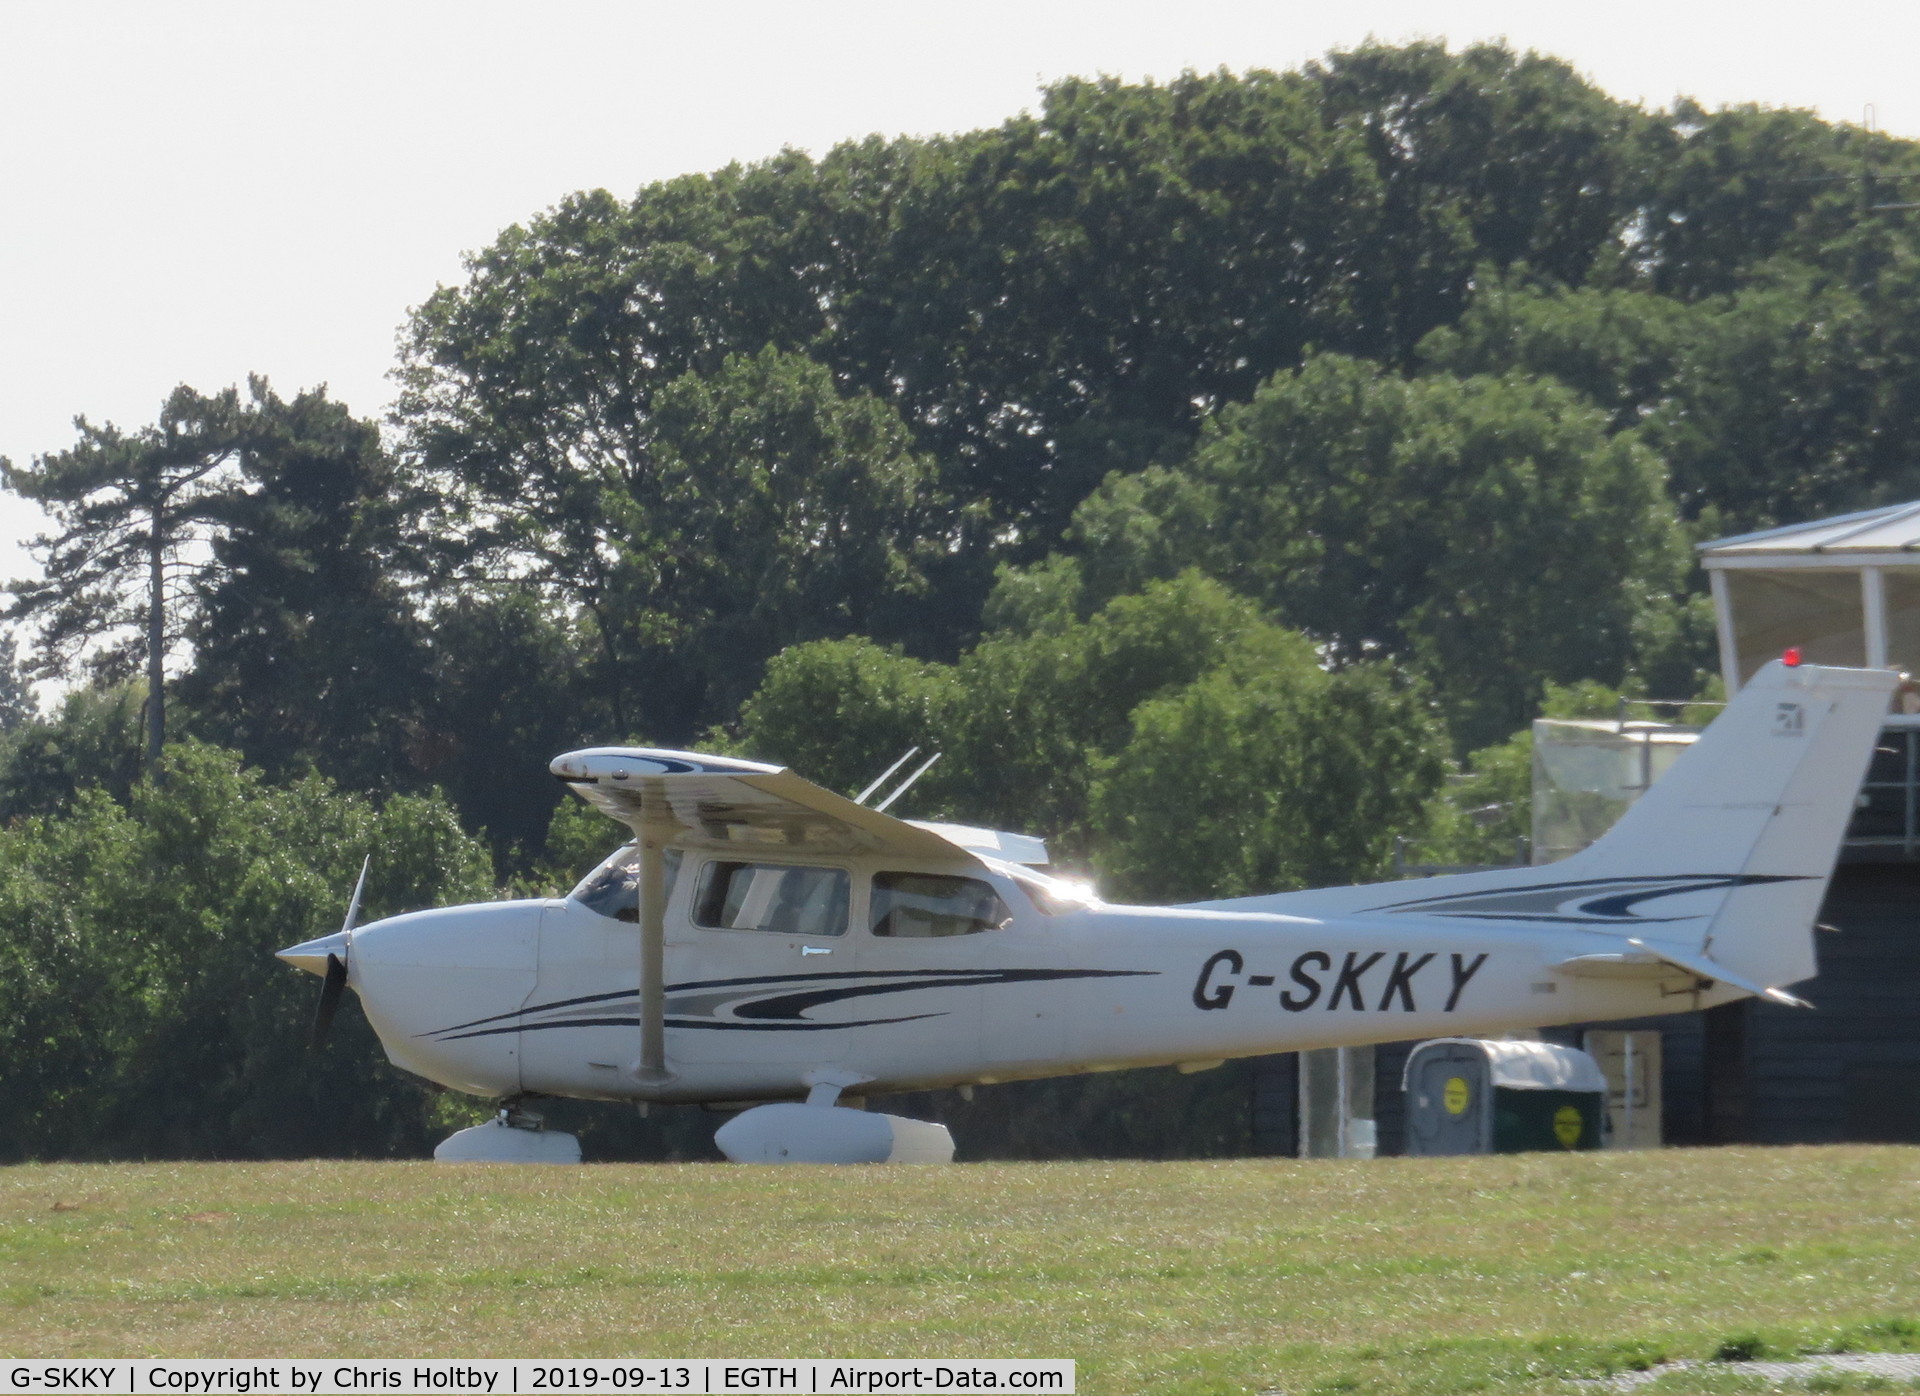 G-SKKY, 2005 Cessna 172S C/N 172S9850, Cessna Skyhawk parked to refuel at Old Warden